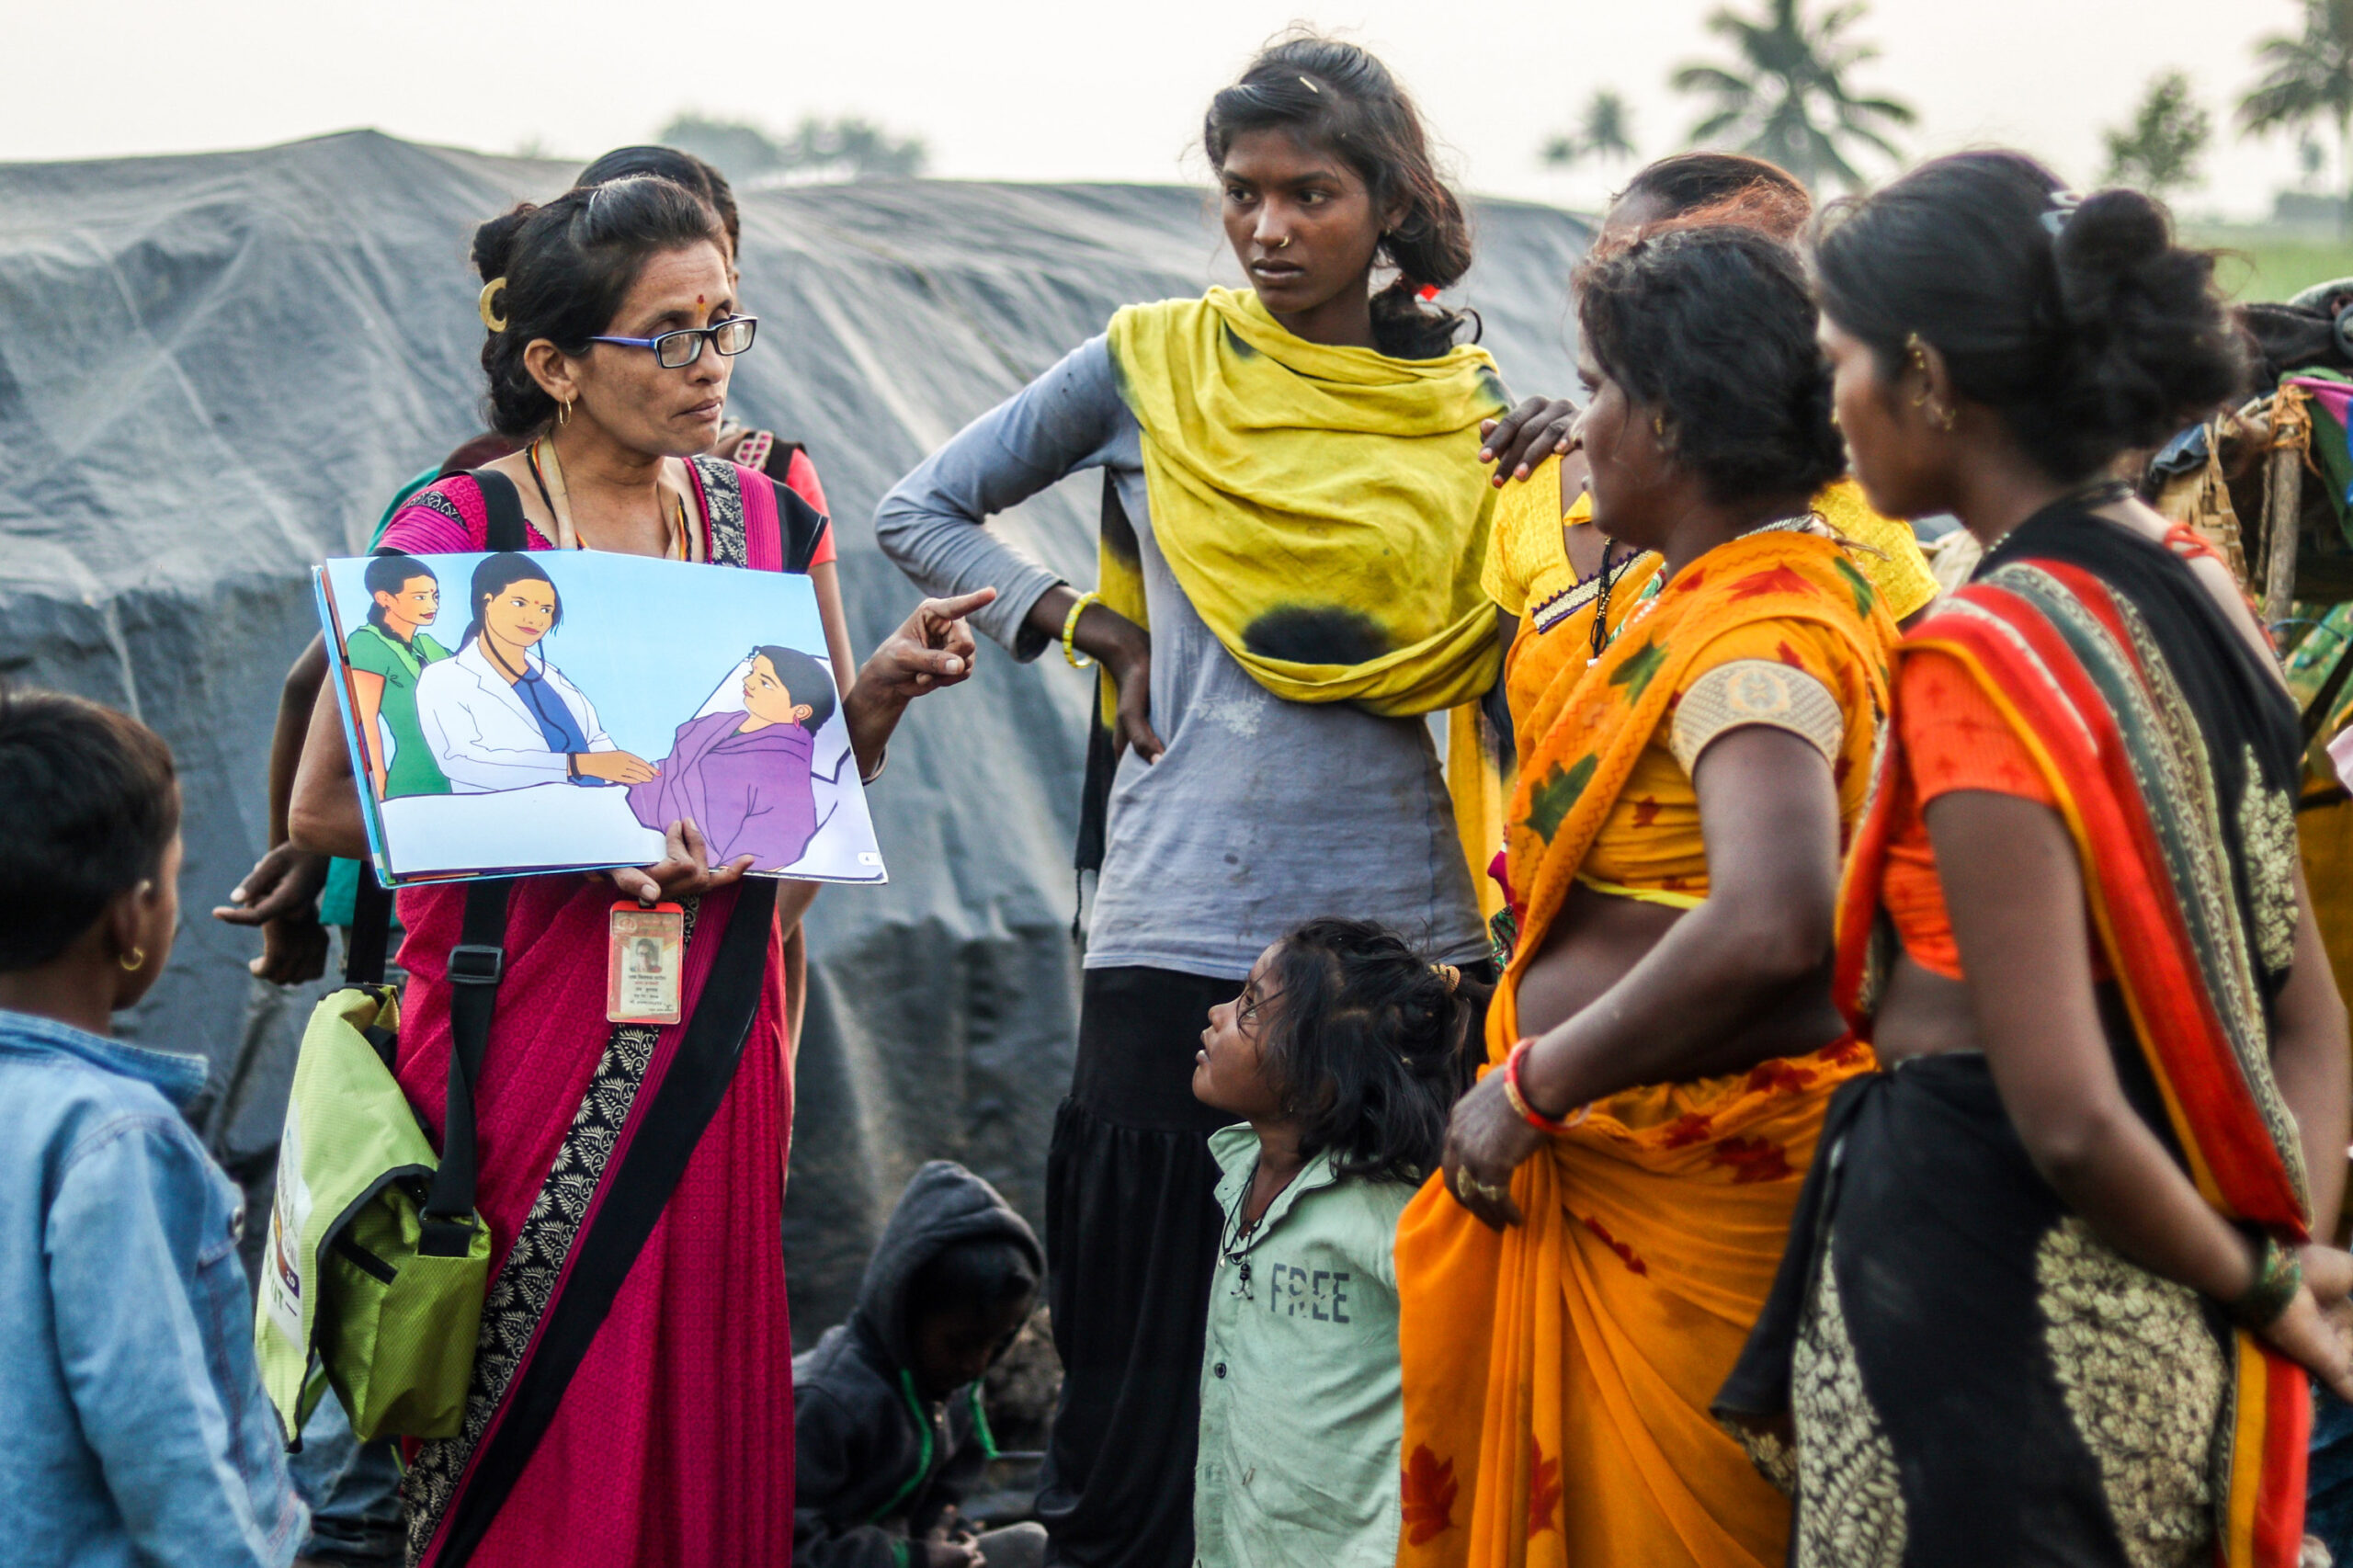 Maya Patil standing outdoors in a group of young women and children and holding up an illustrated book